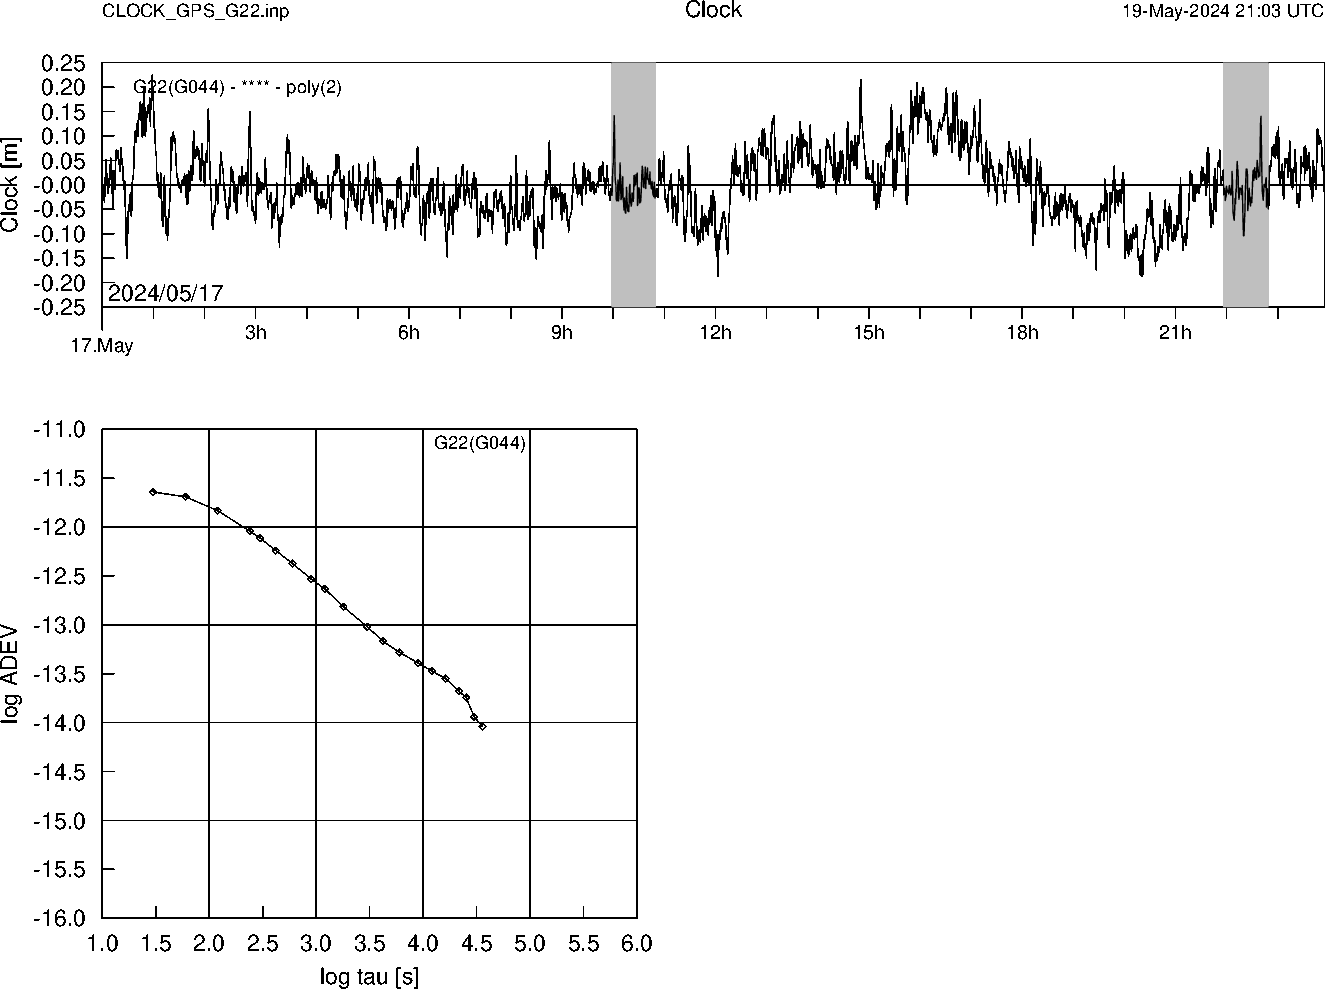 GPS G22 Clock Time Series and Allan Deviation